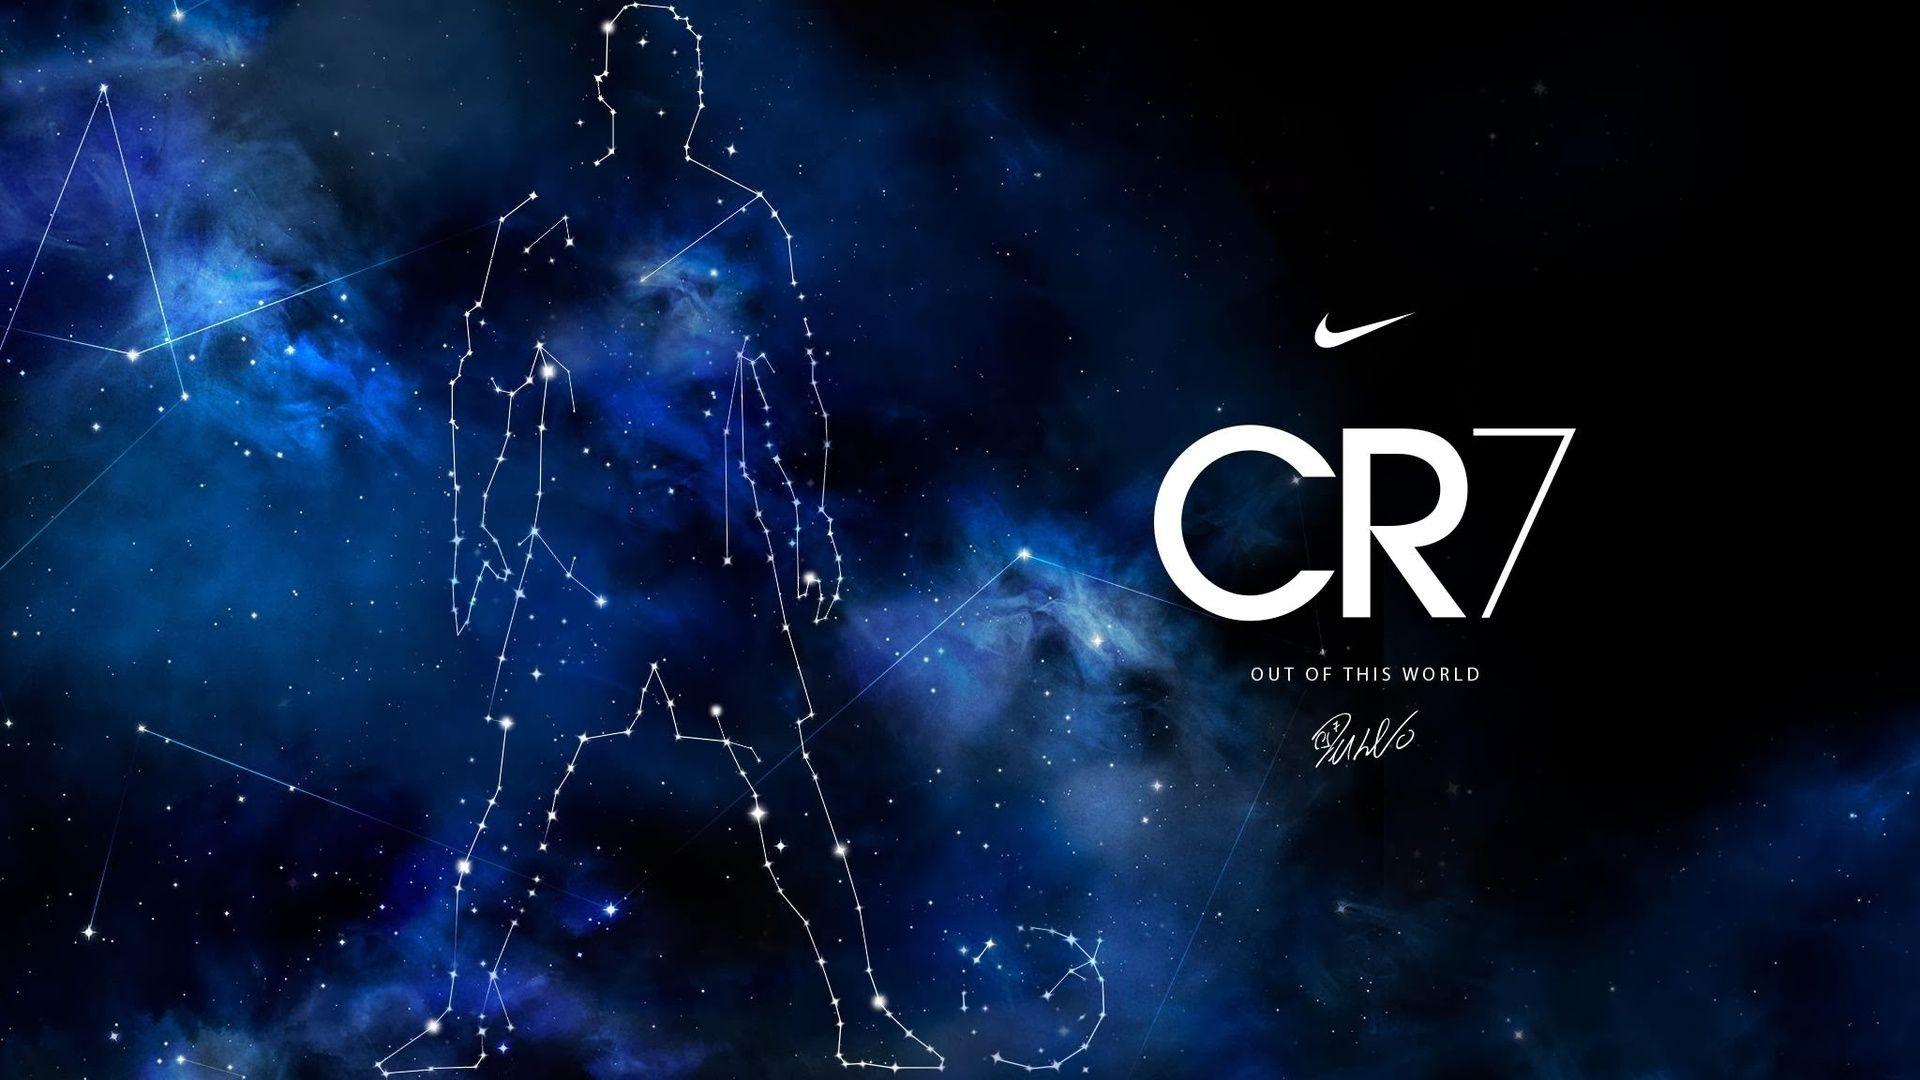 Football, Soccer, Galaxy, Out Of This World, Nike, Cr7